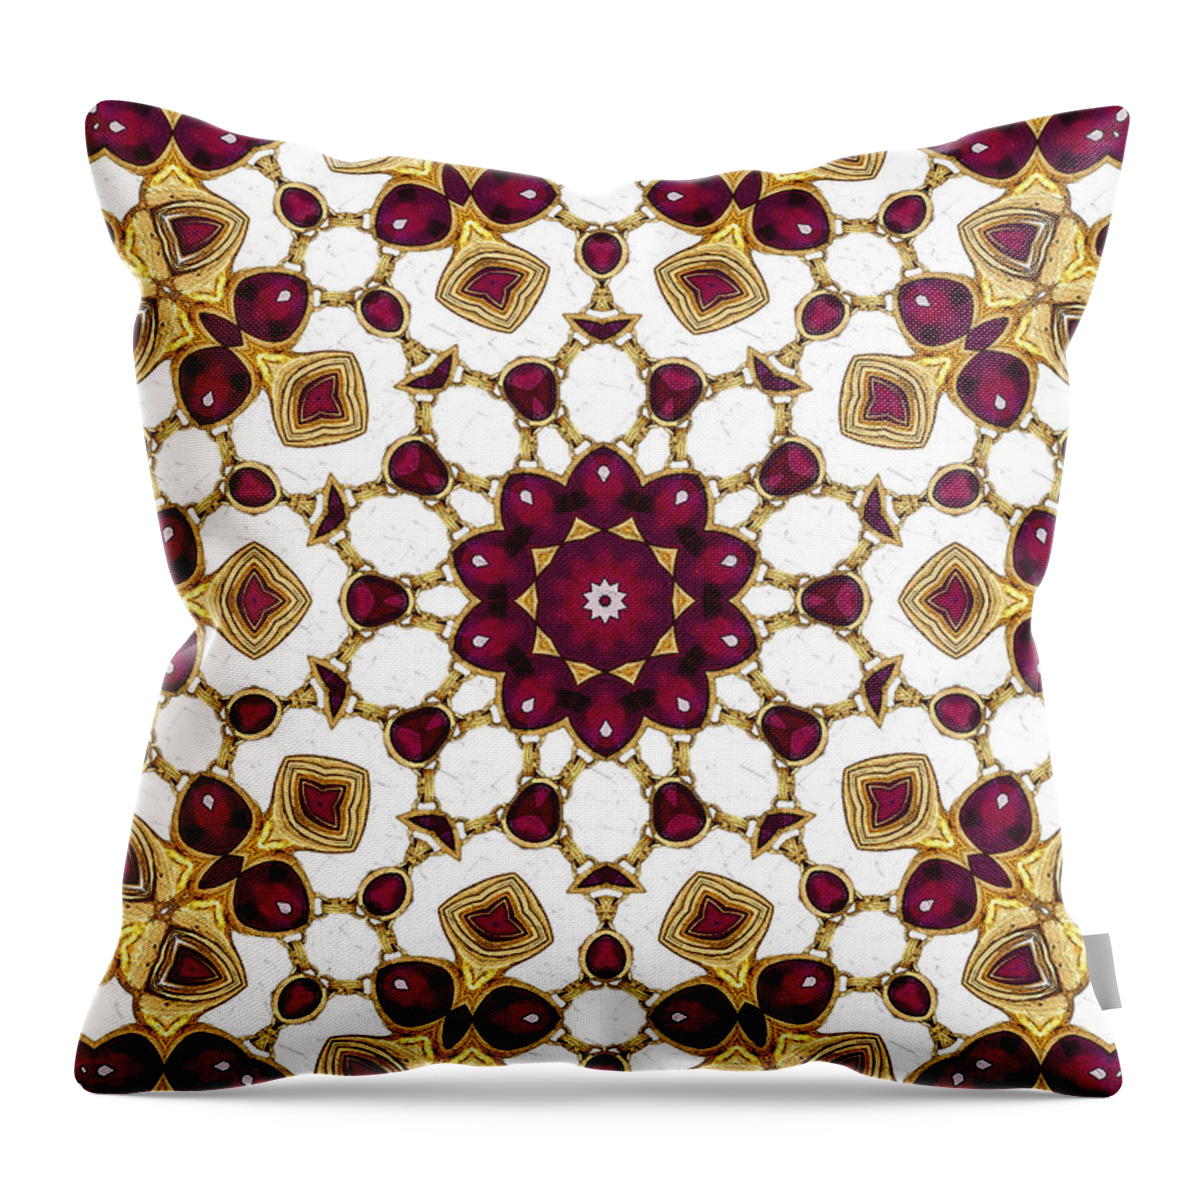 Natalie Holland Art Throw Pillow featuring the mixed media Rubies by Natalie Holland